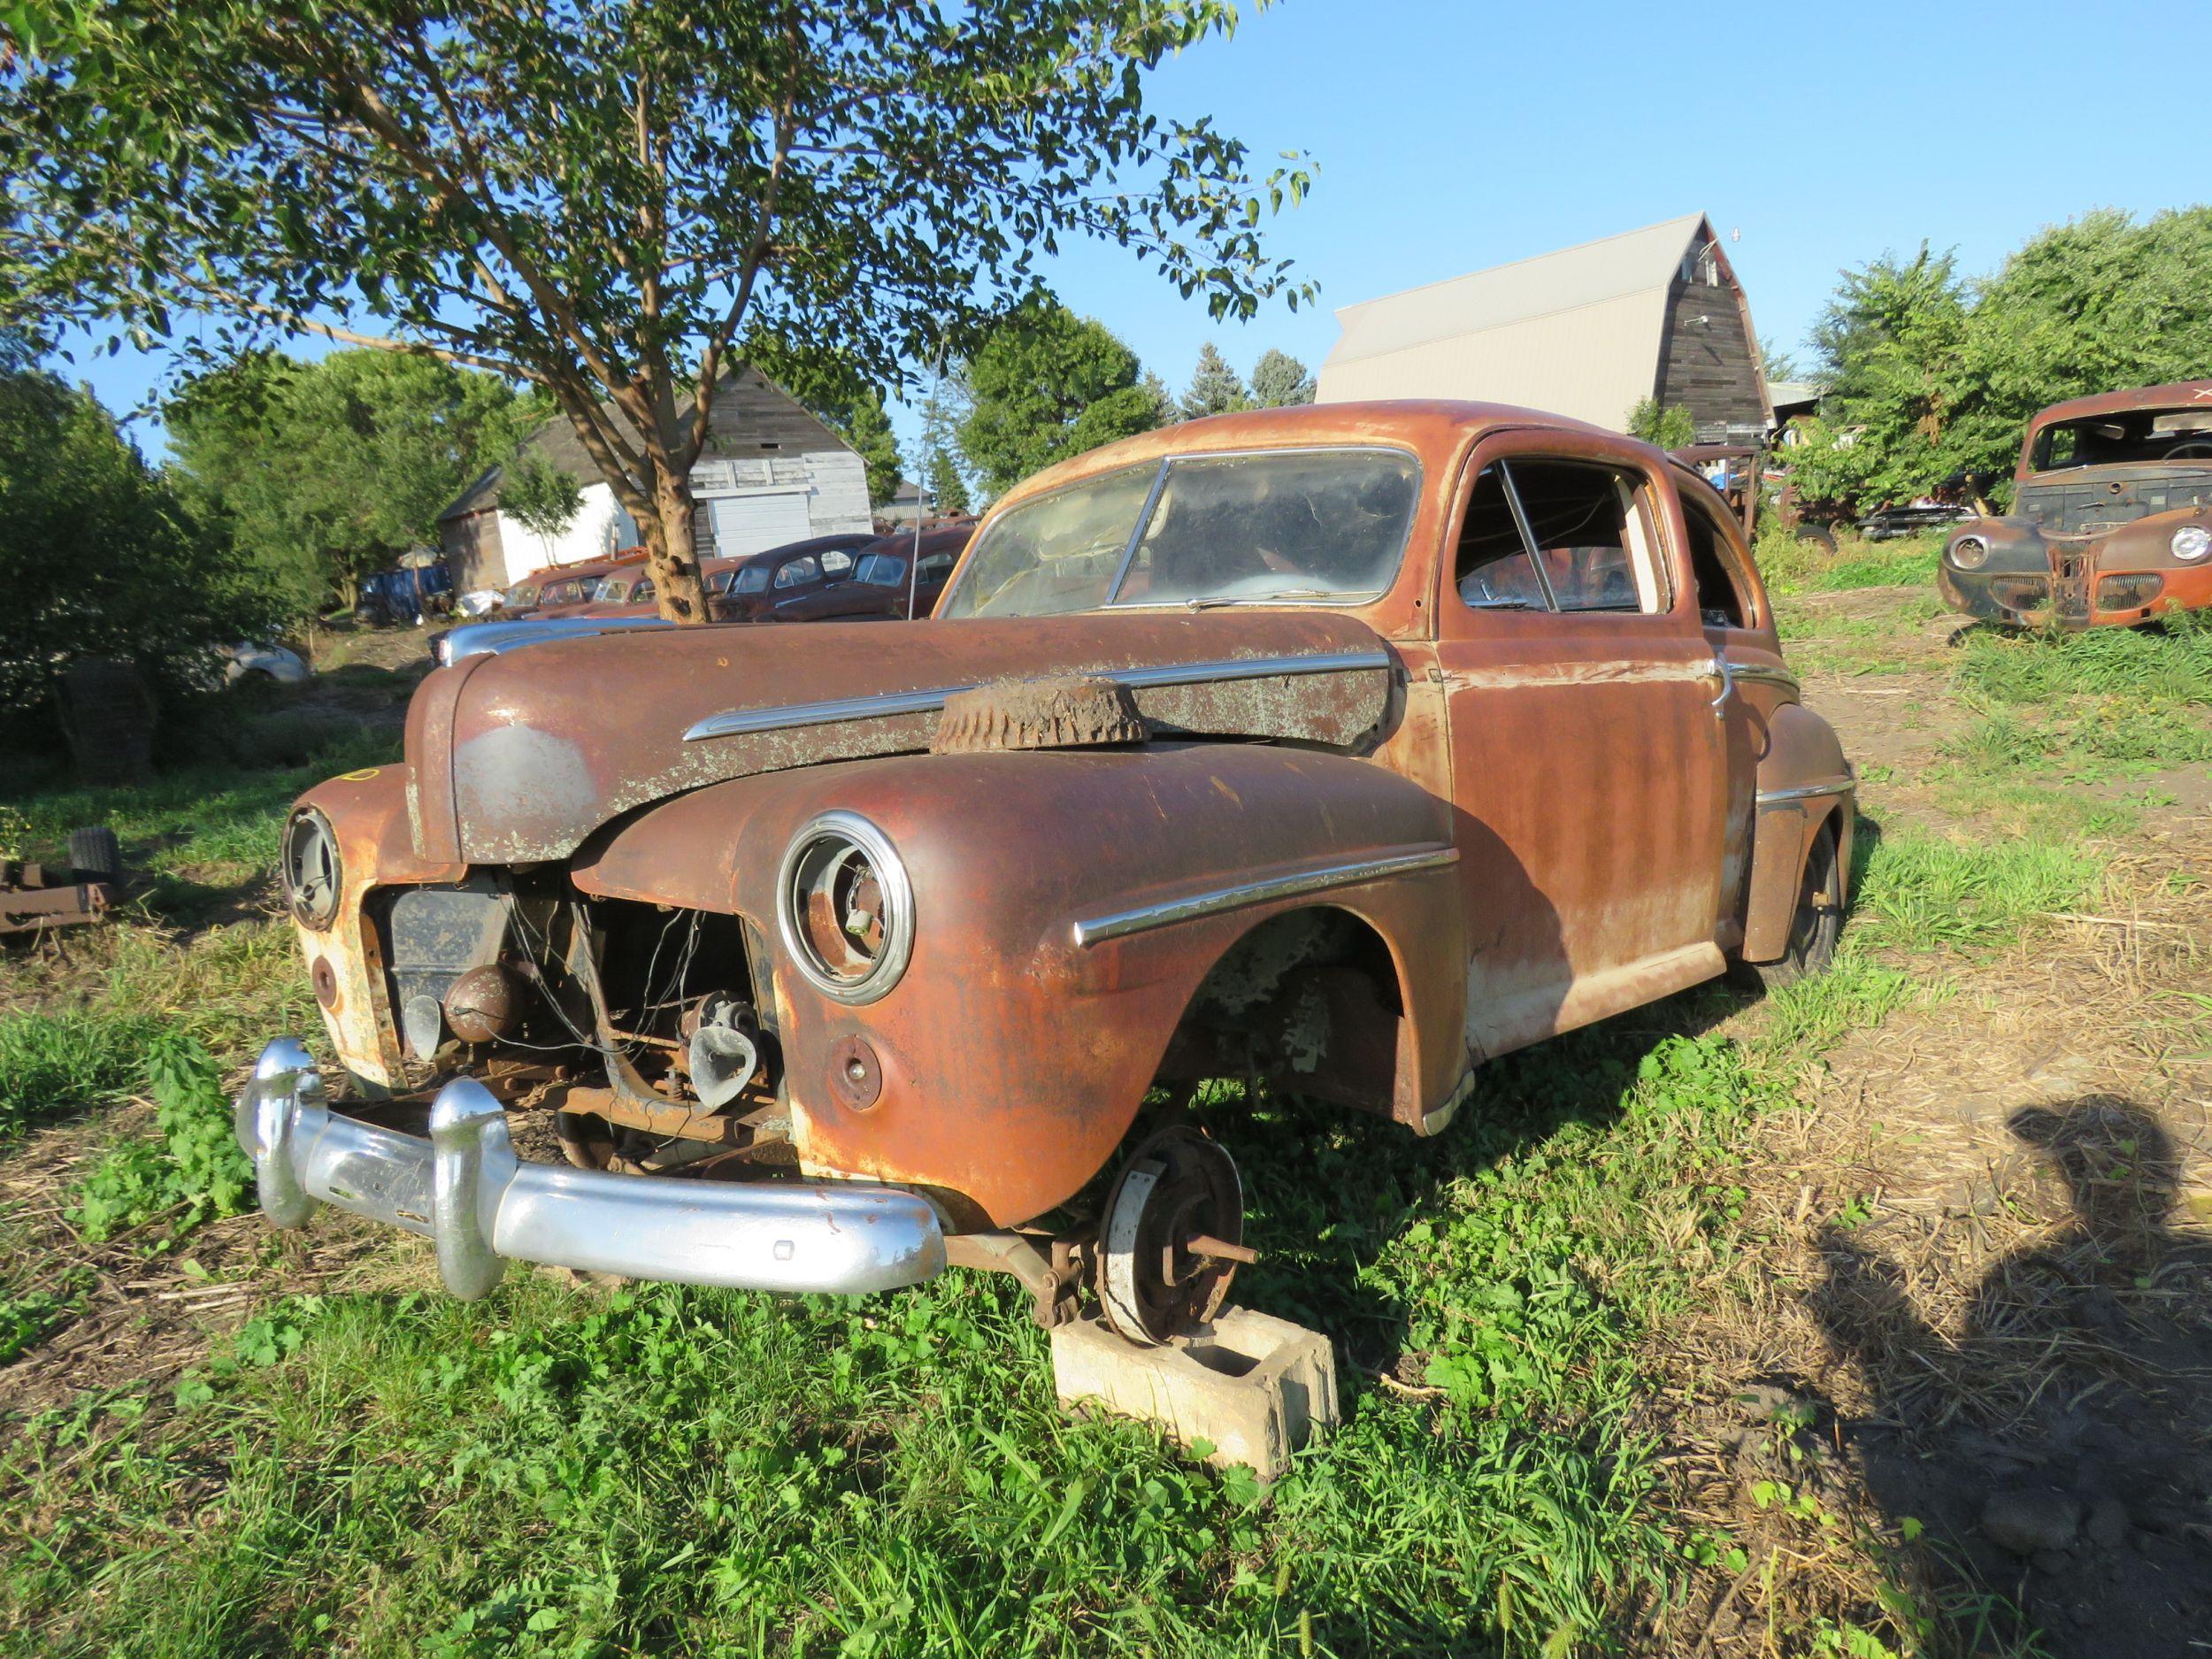 1947 Ford 2dr Sedan Body for Rod or Parts